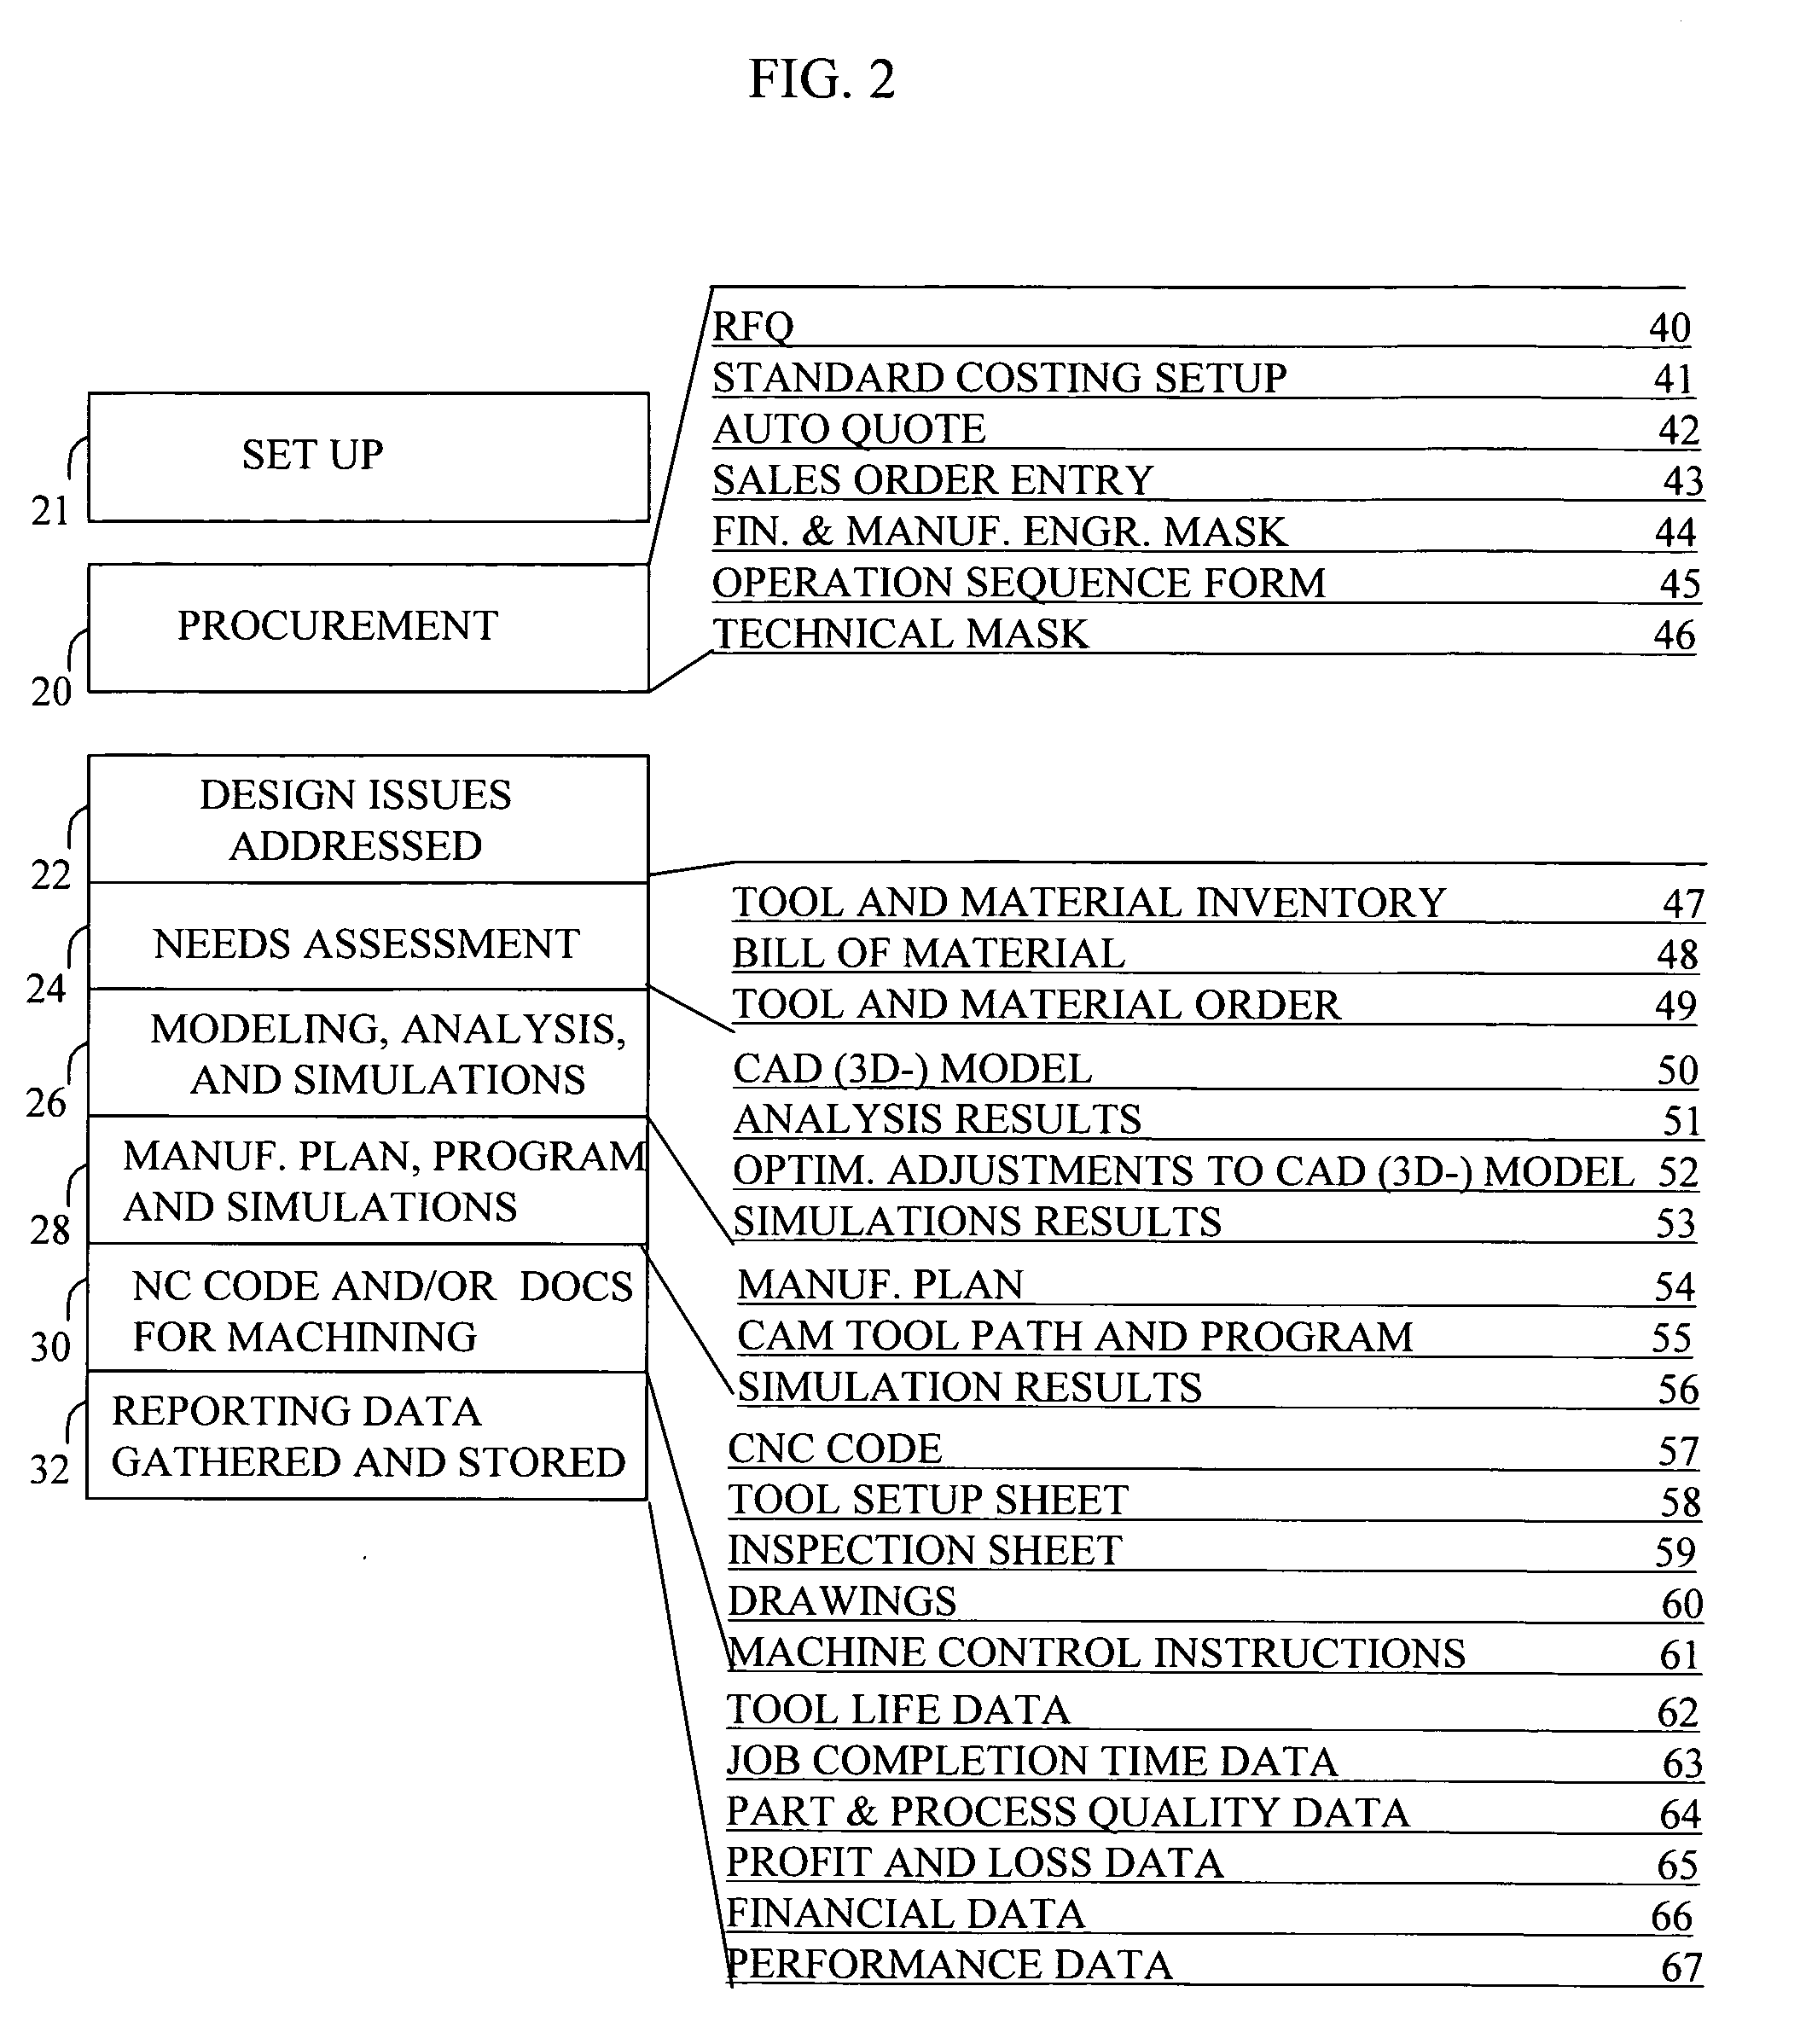 Processes and systems for creation of machine control for specialty machines requiring manual input